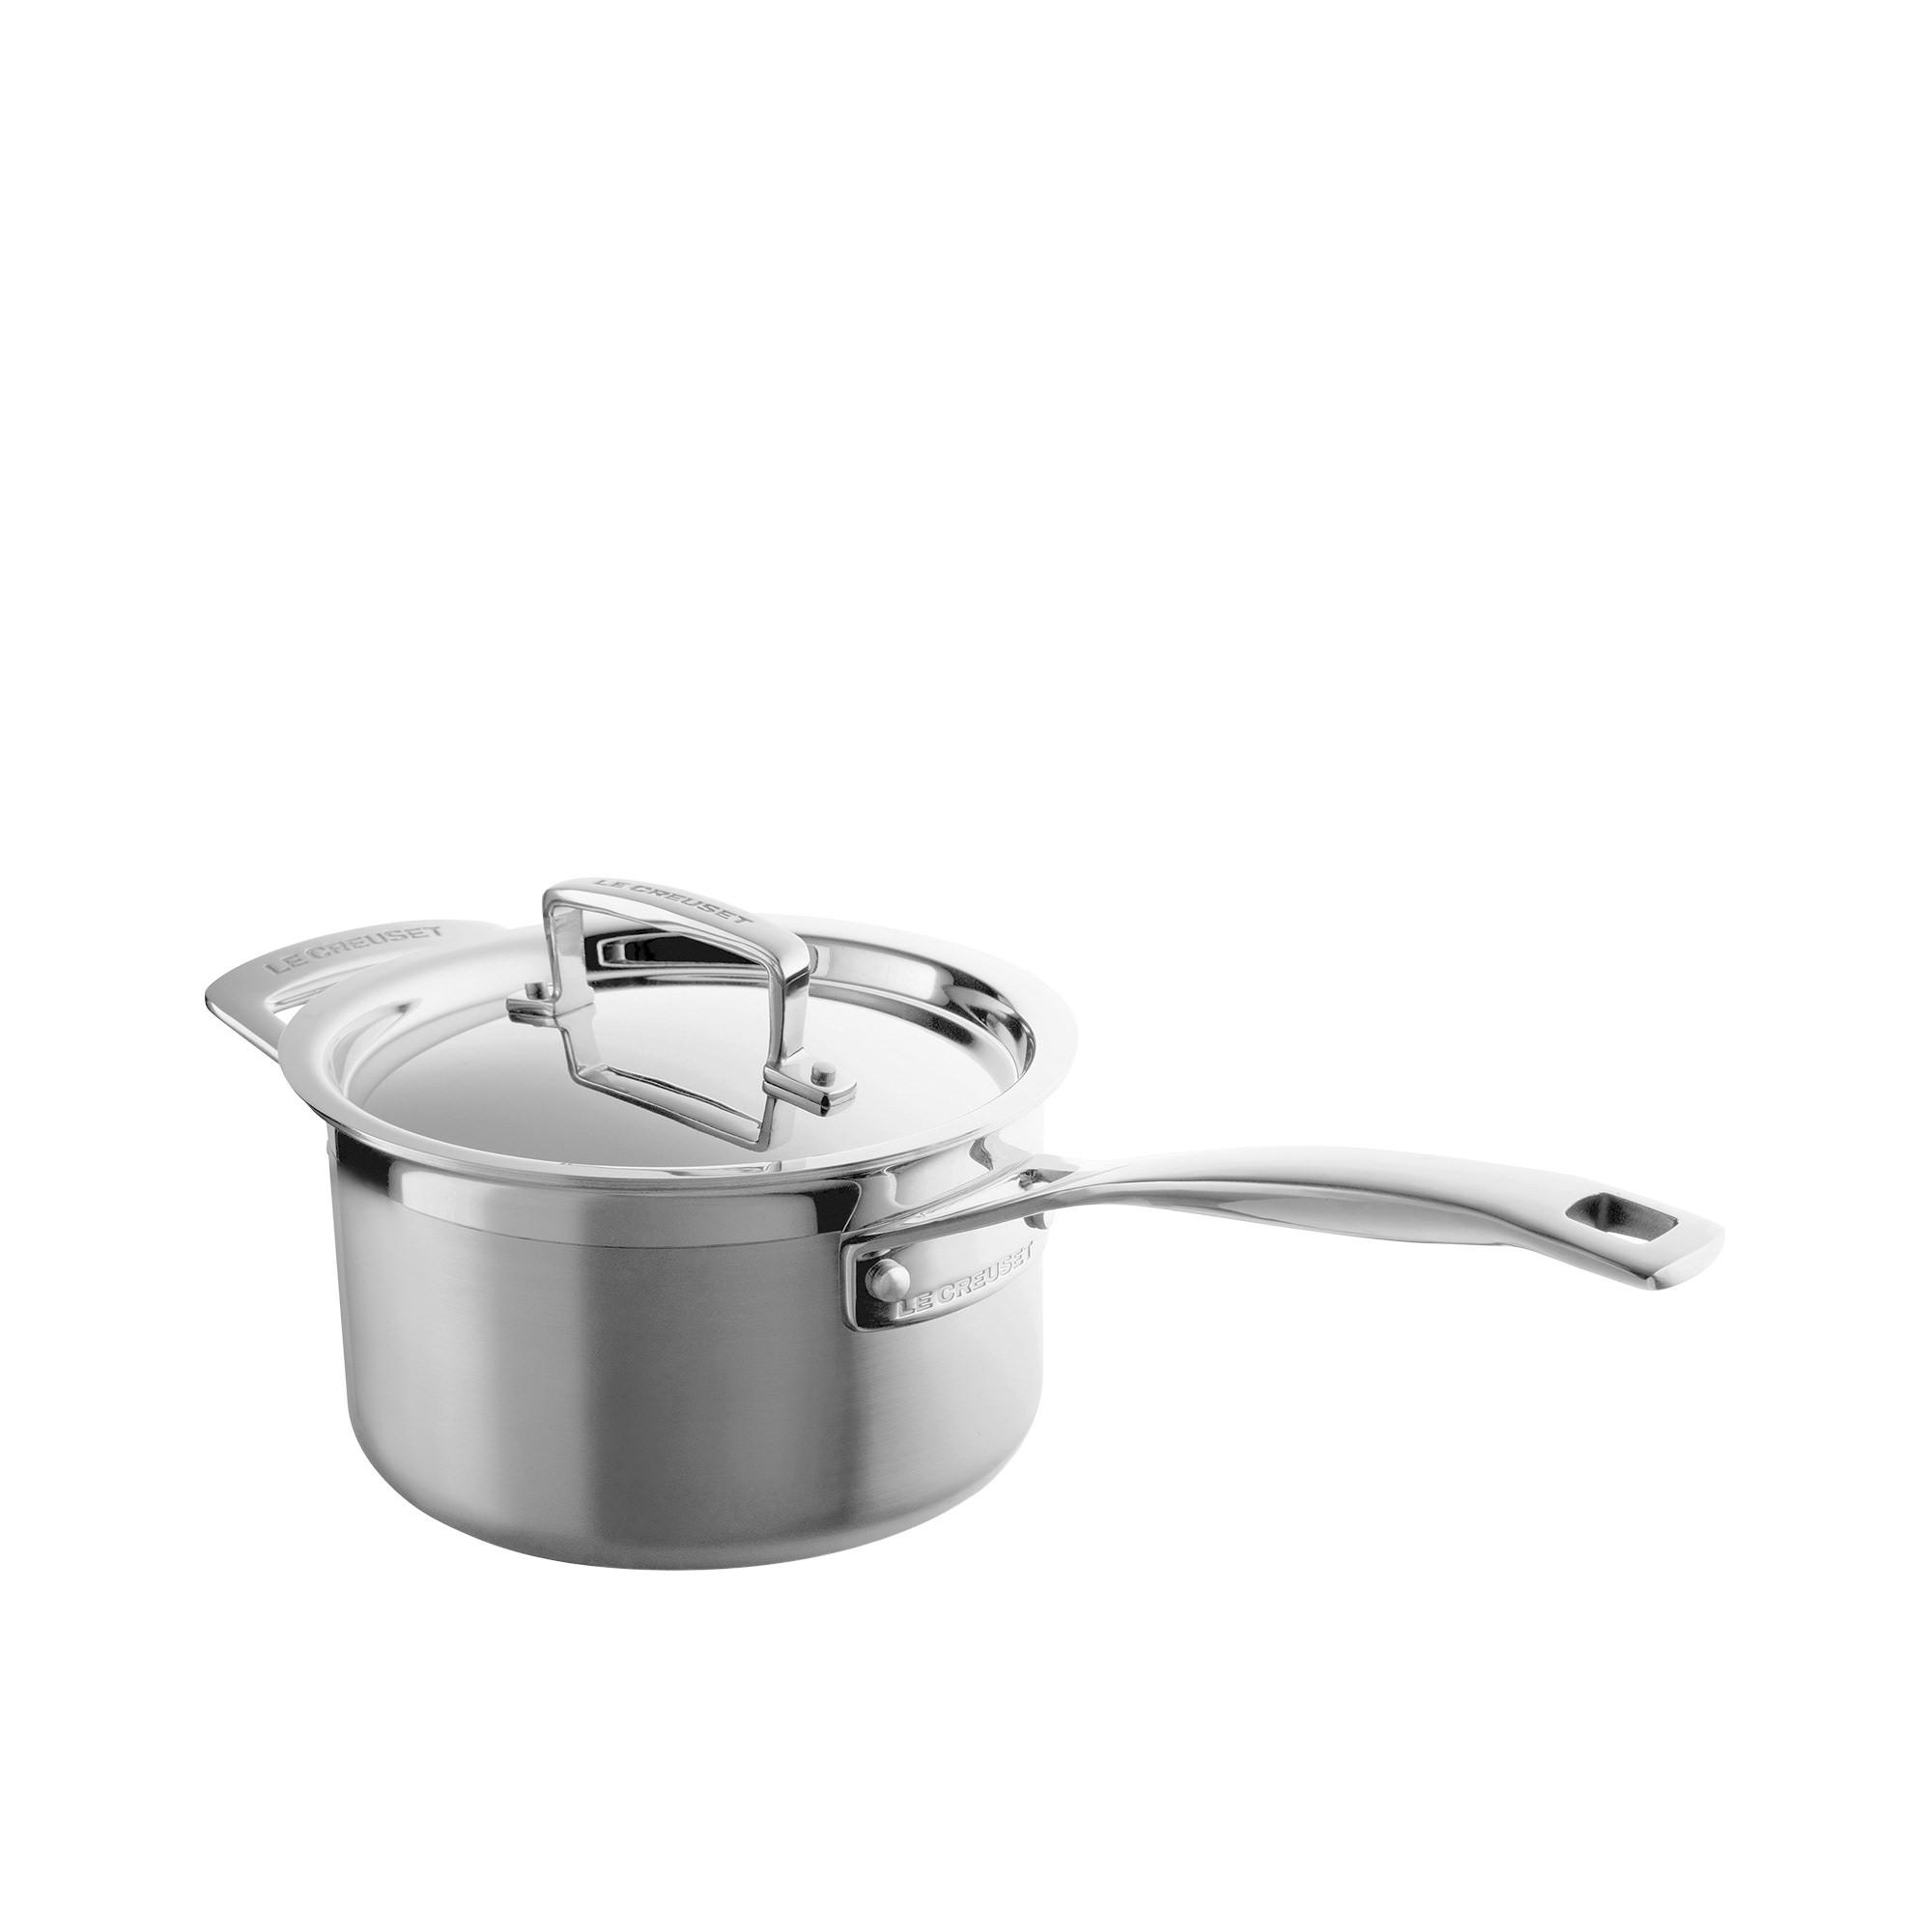 Le Creuset 3-Ply Stainless Steel Saucepan with Lid 16cm - 1.9L Image 3